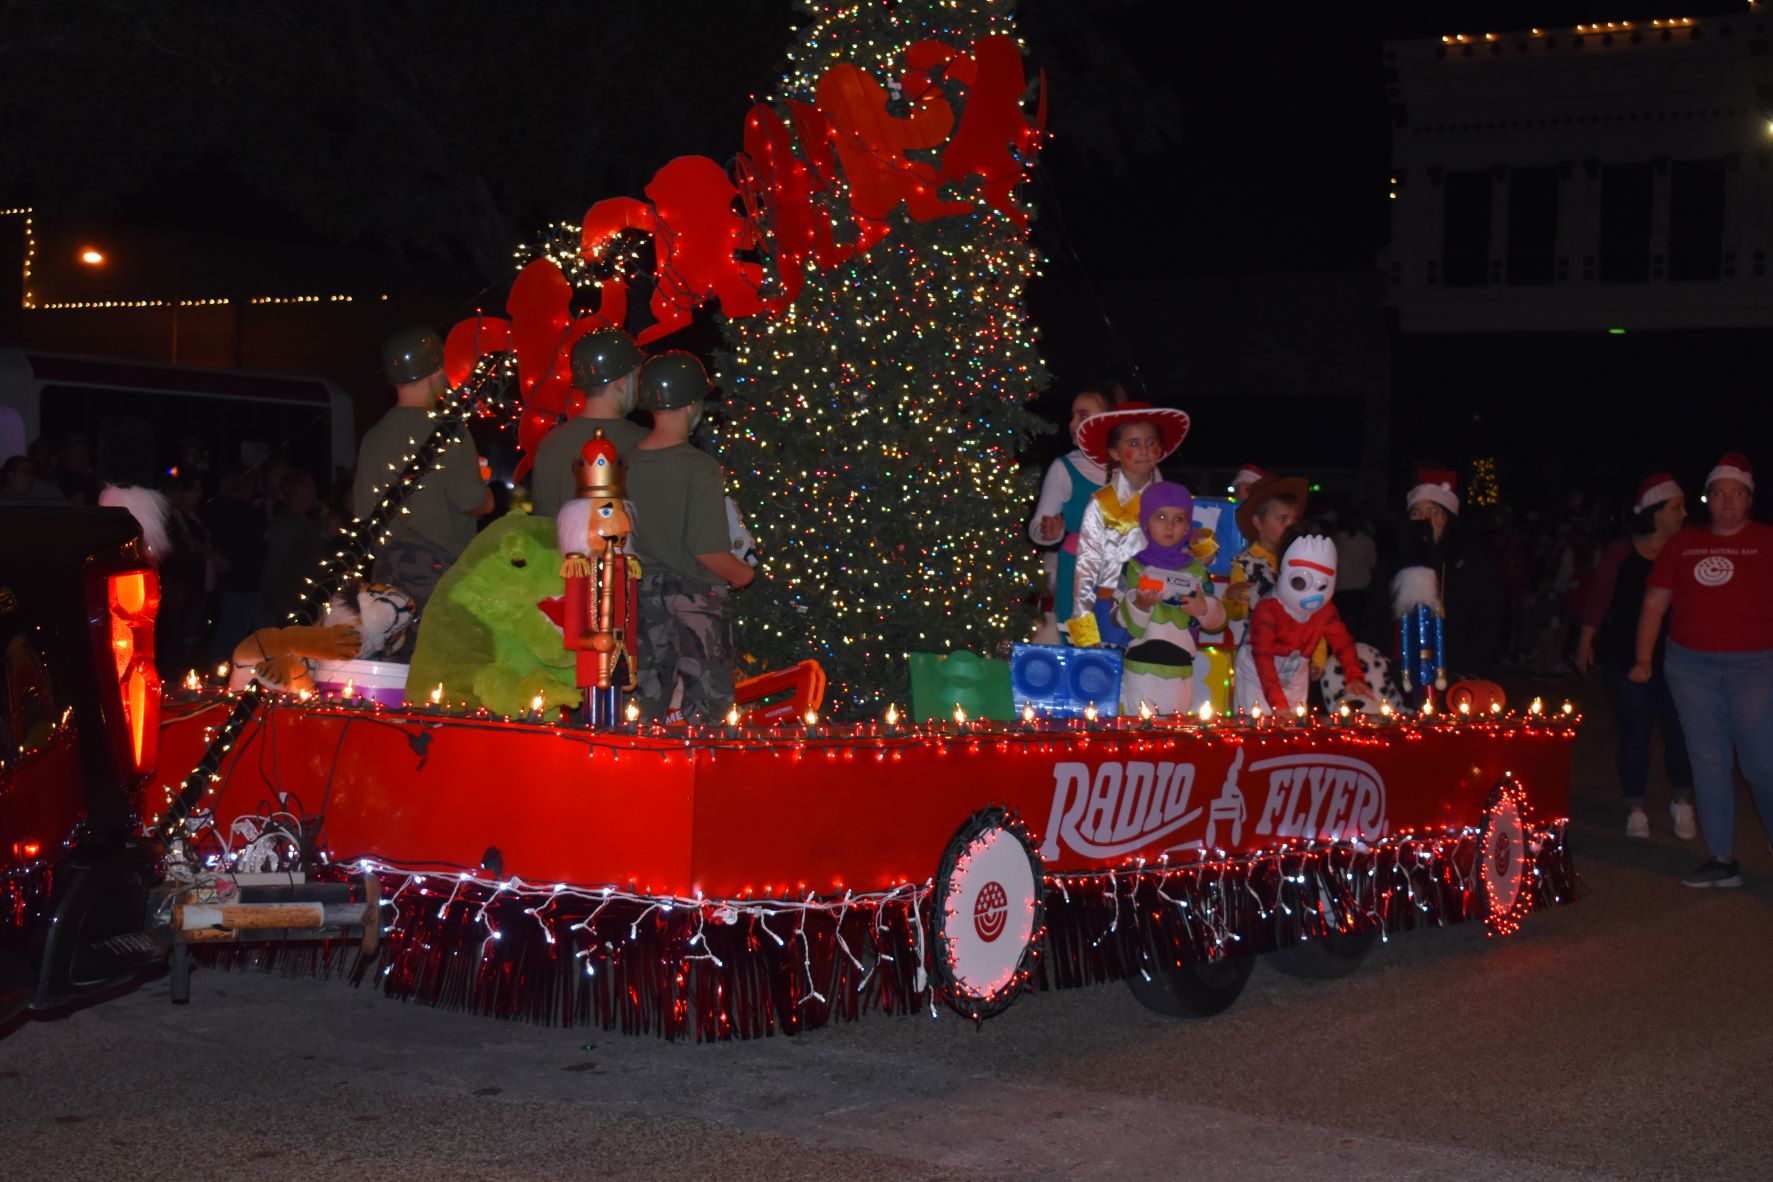 Citizans National Bank 2nd Place Float